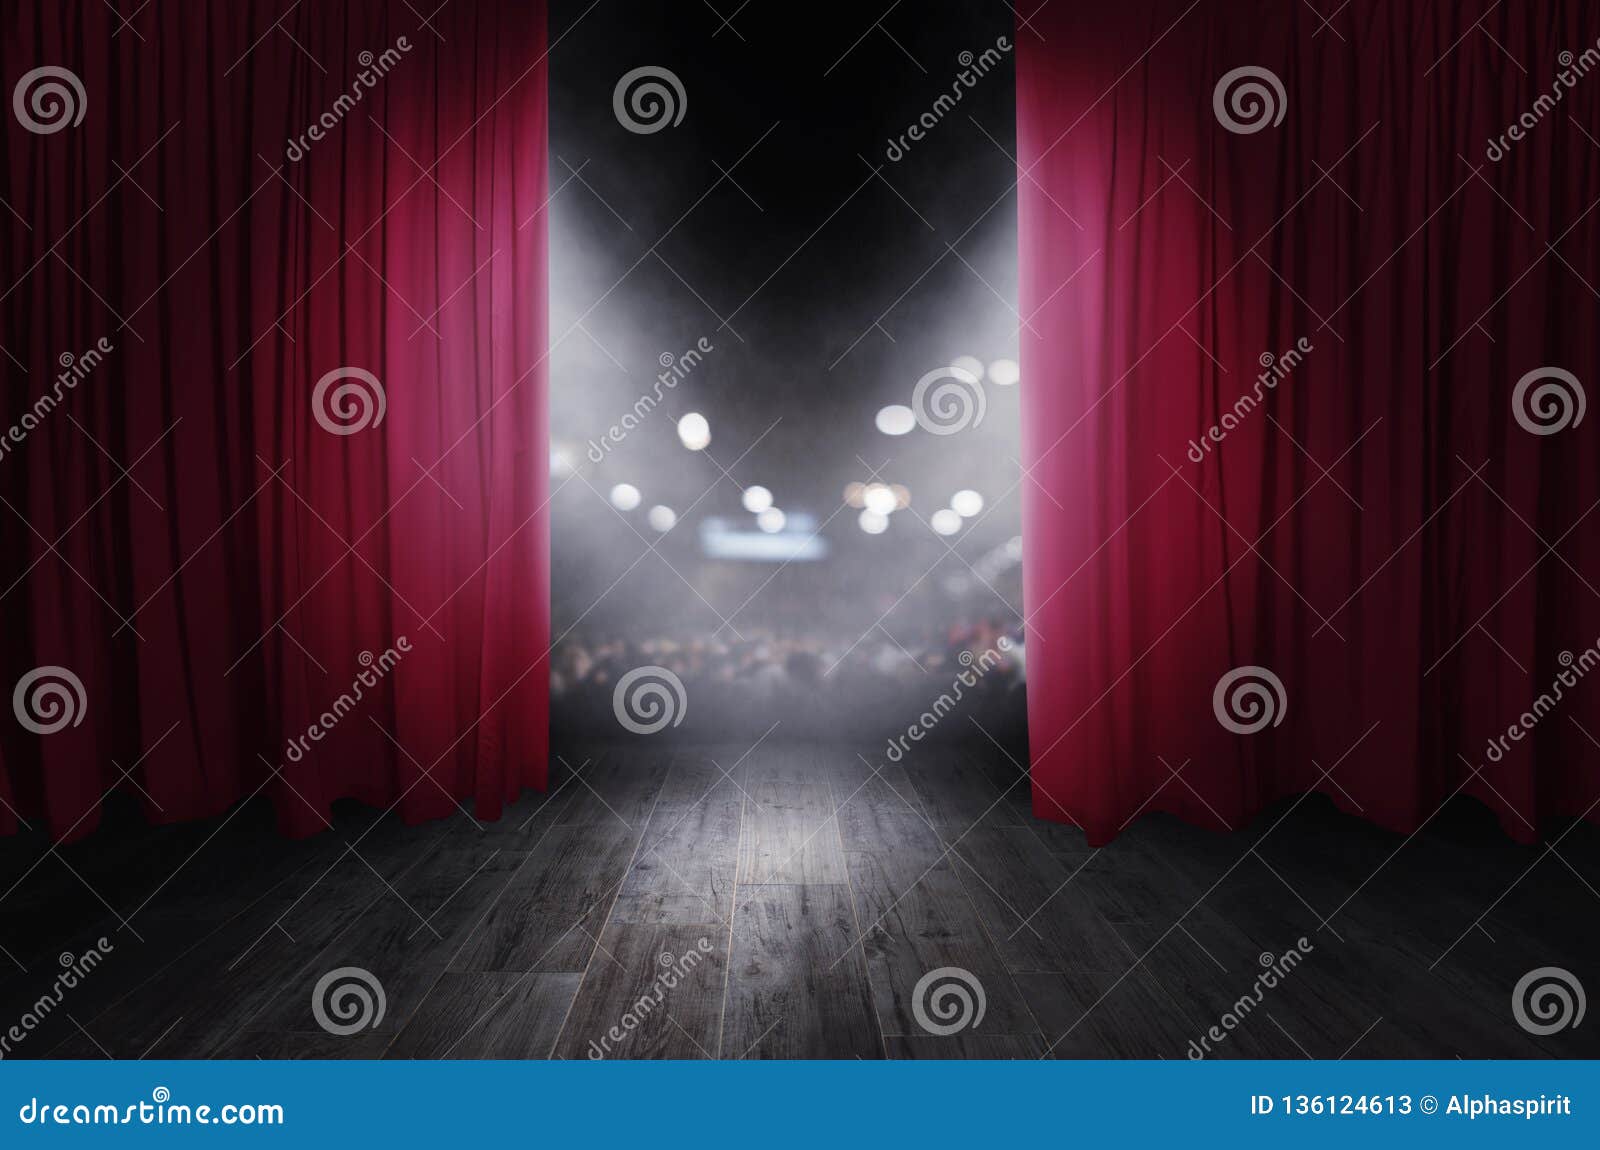 the red curtains are opening for the theater show